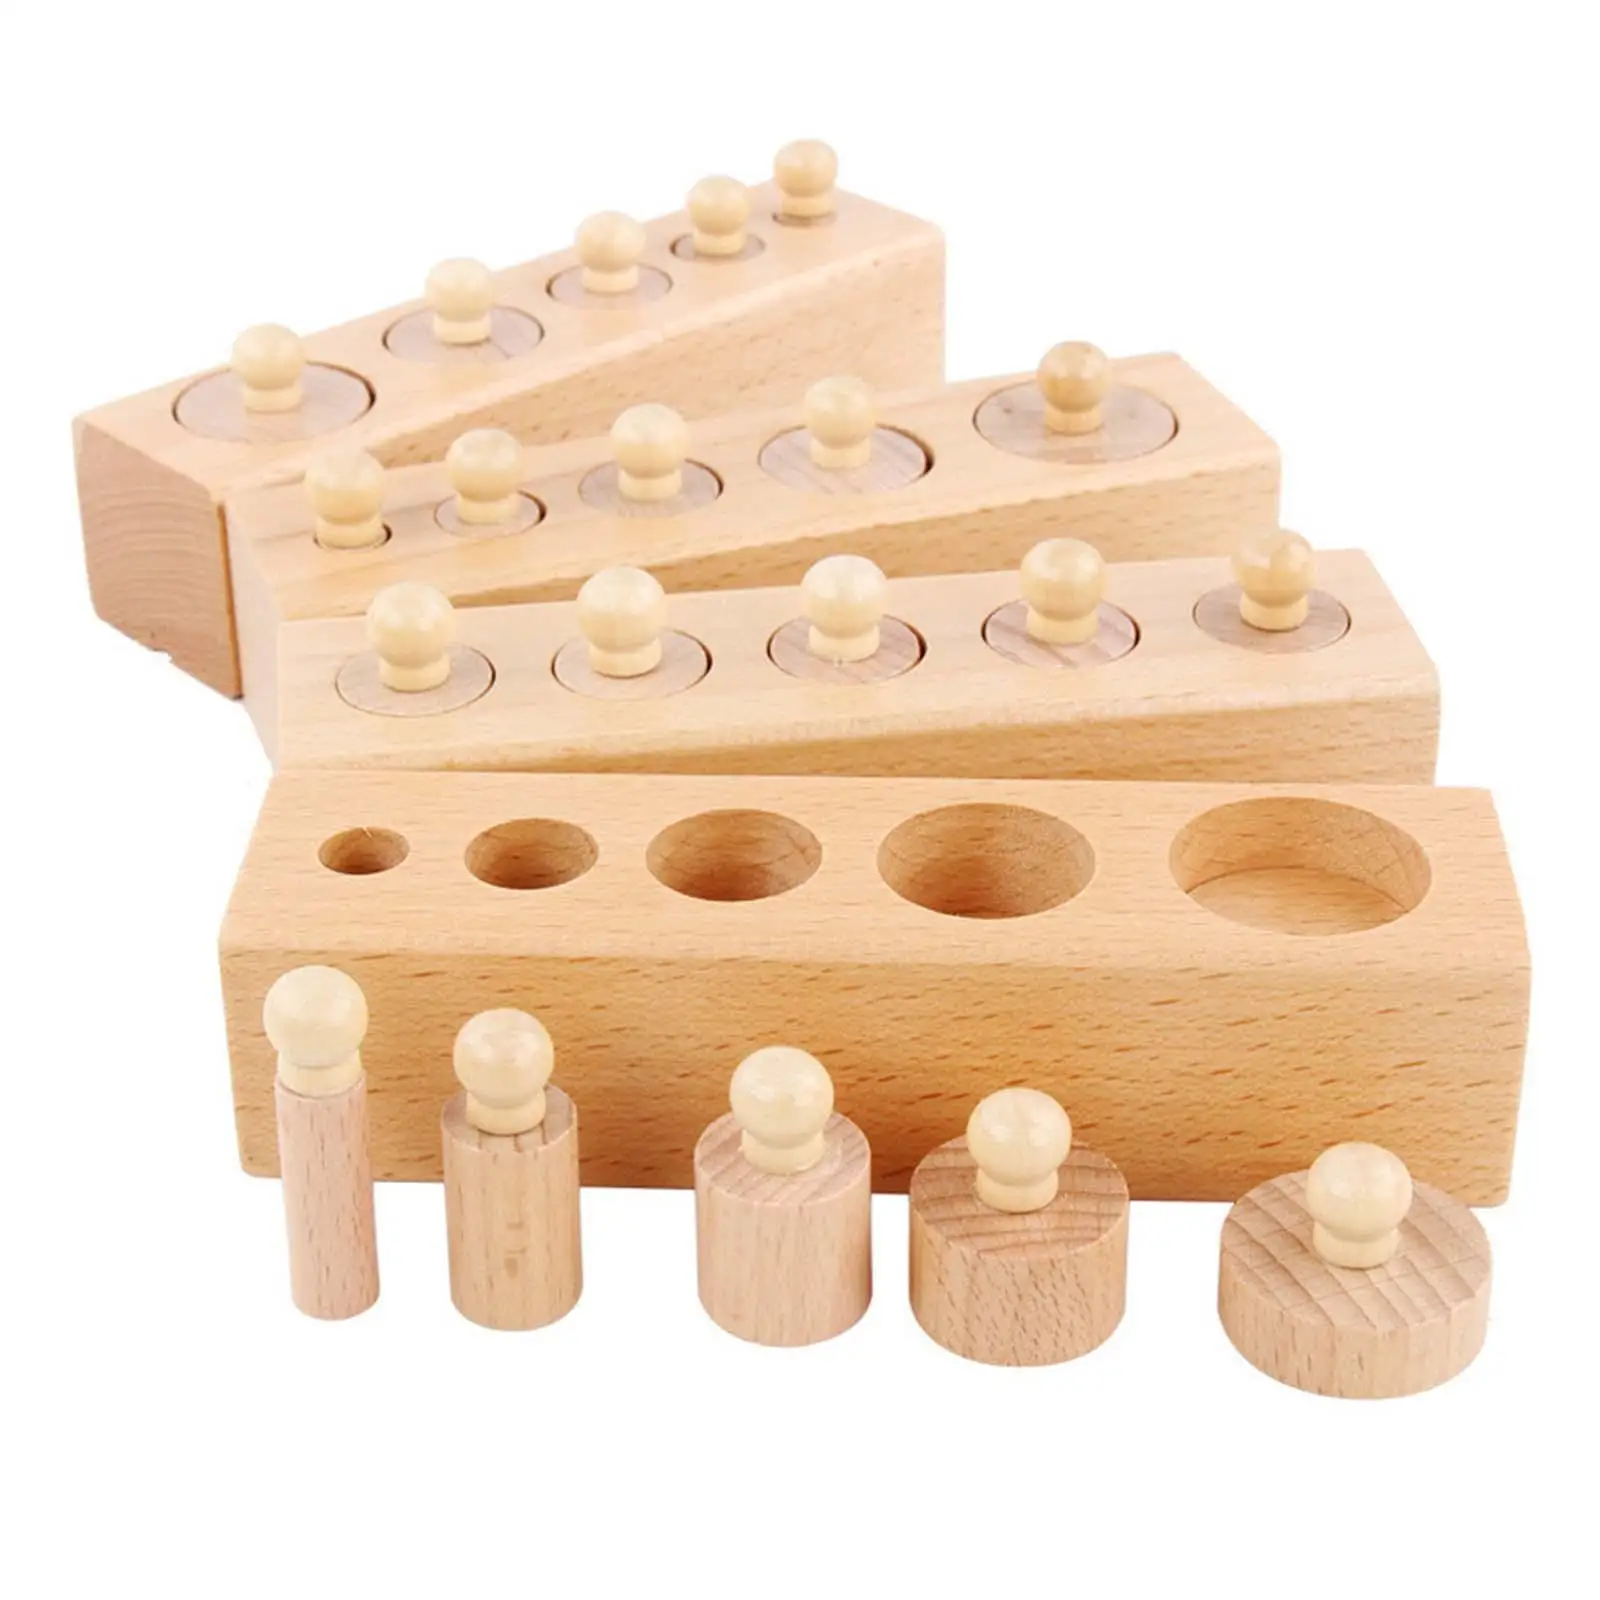 4Pcs Wooden Cylinders Ladder Blocks Early Development Coordination Montessori Knobbed Cylinders for Home School Childern Baby